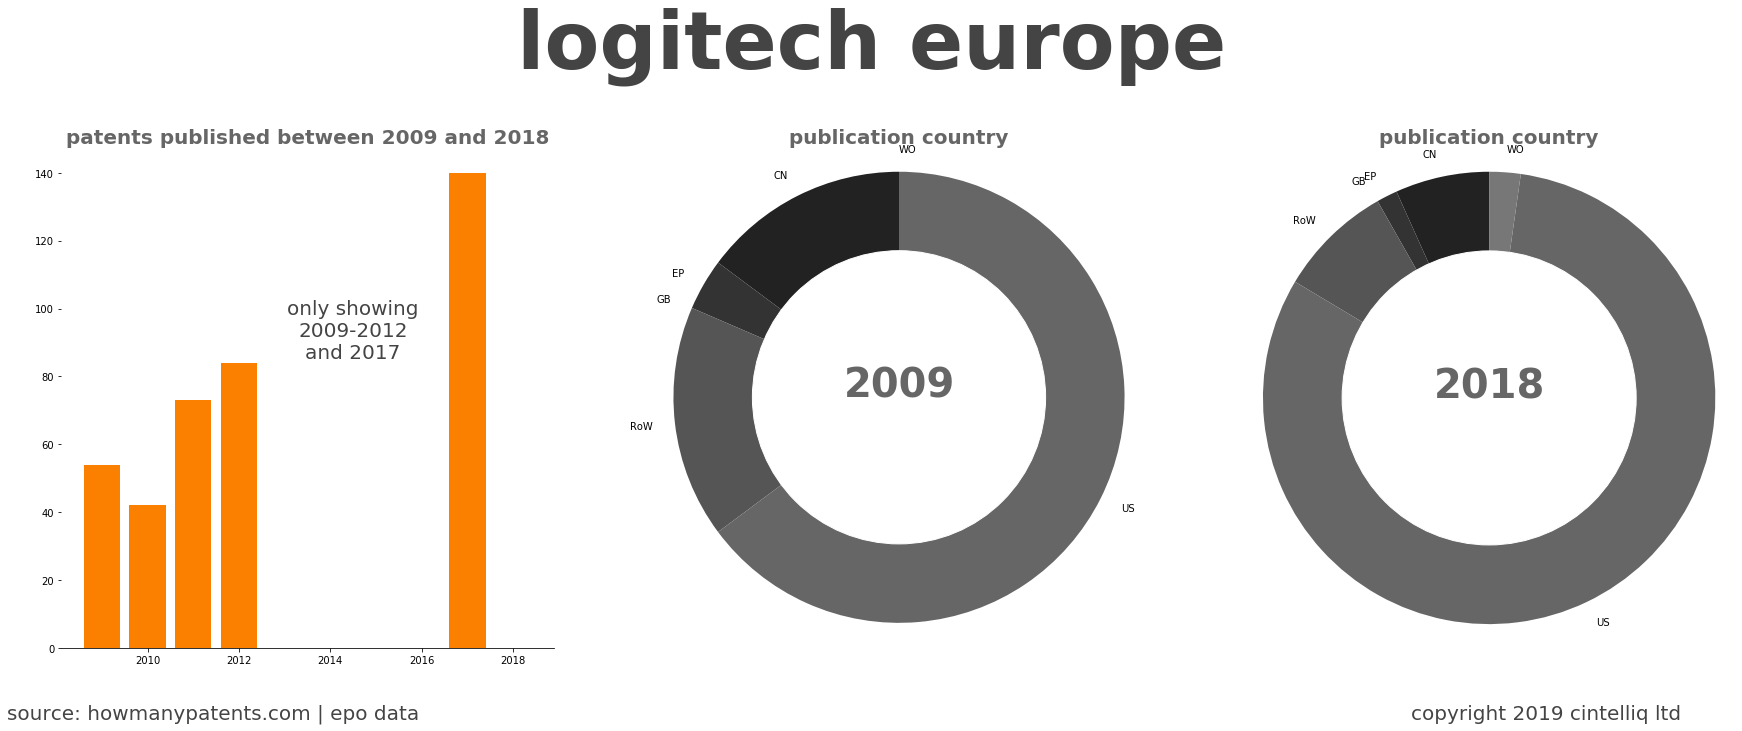 summary of patents for Logitech Europe